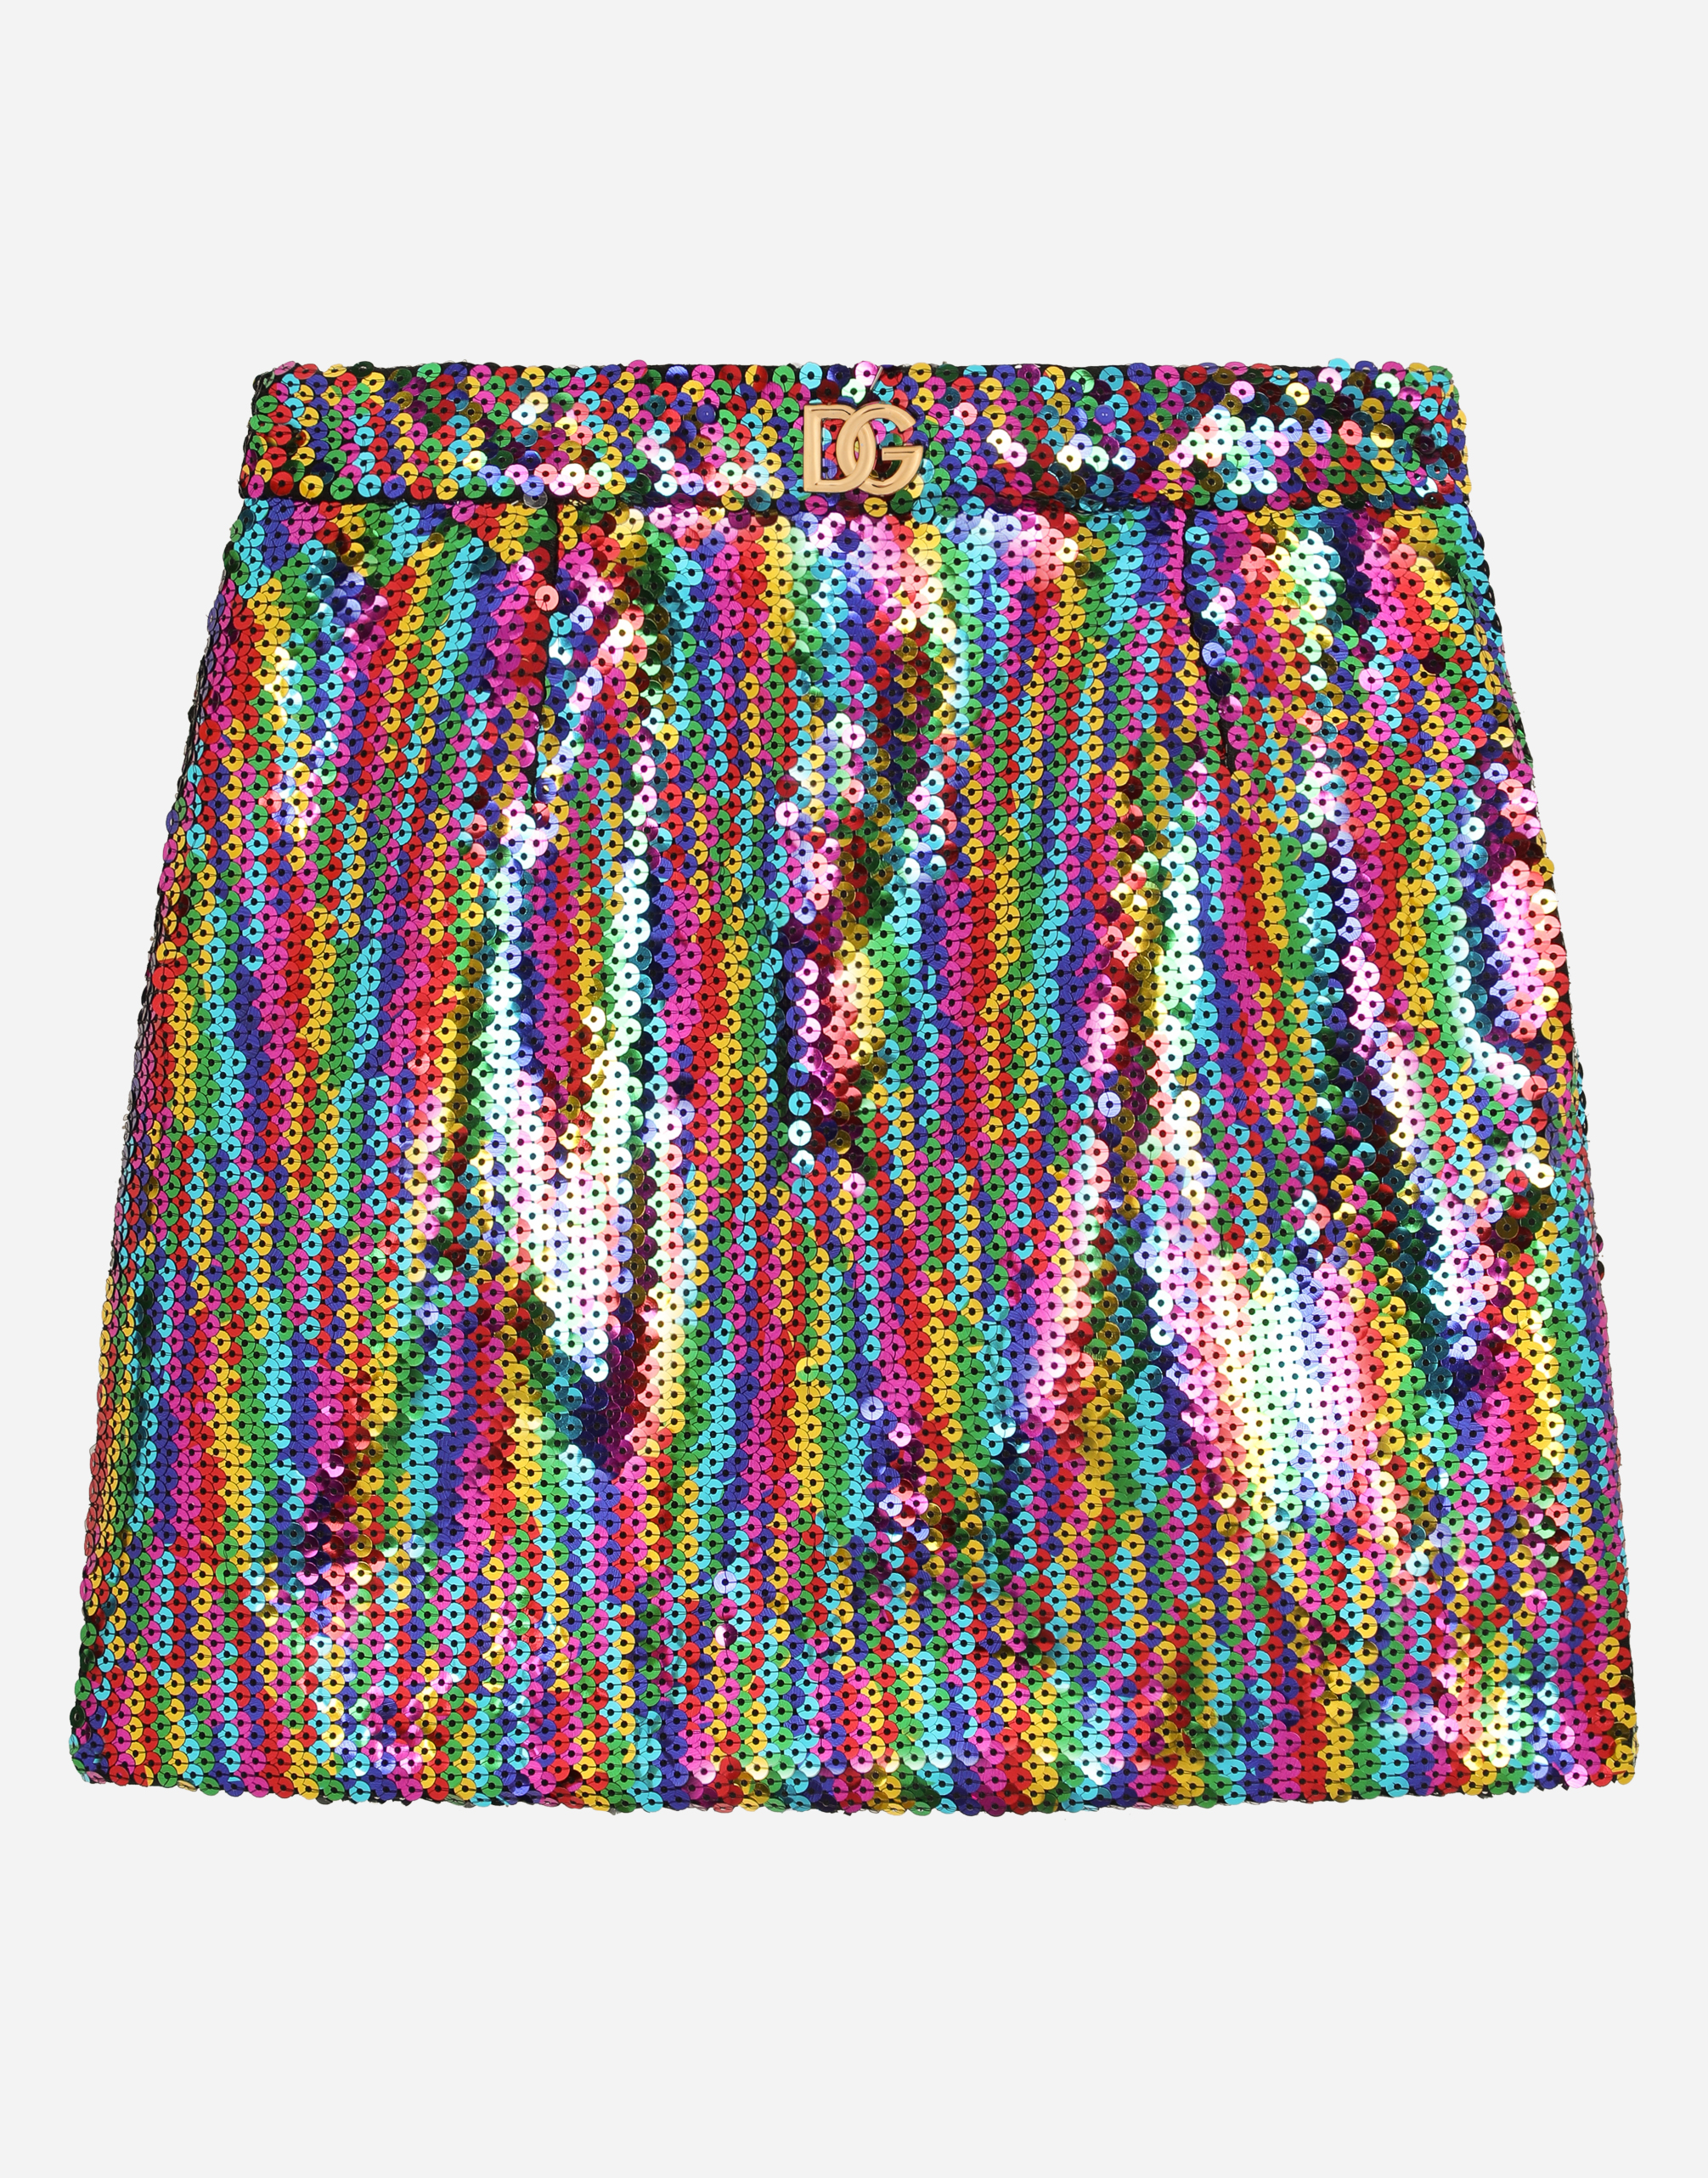 Short skirt with multi-colored sequins in Multicolor